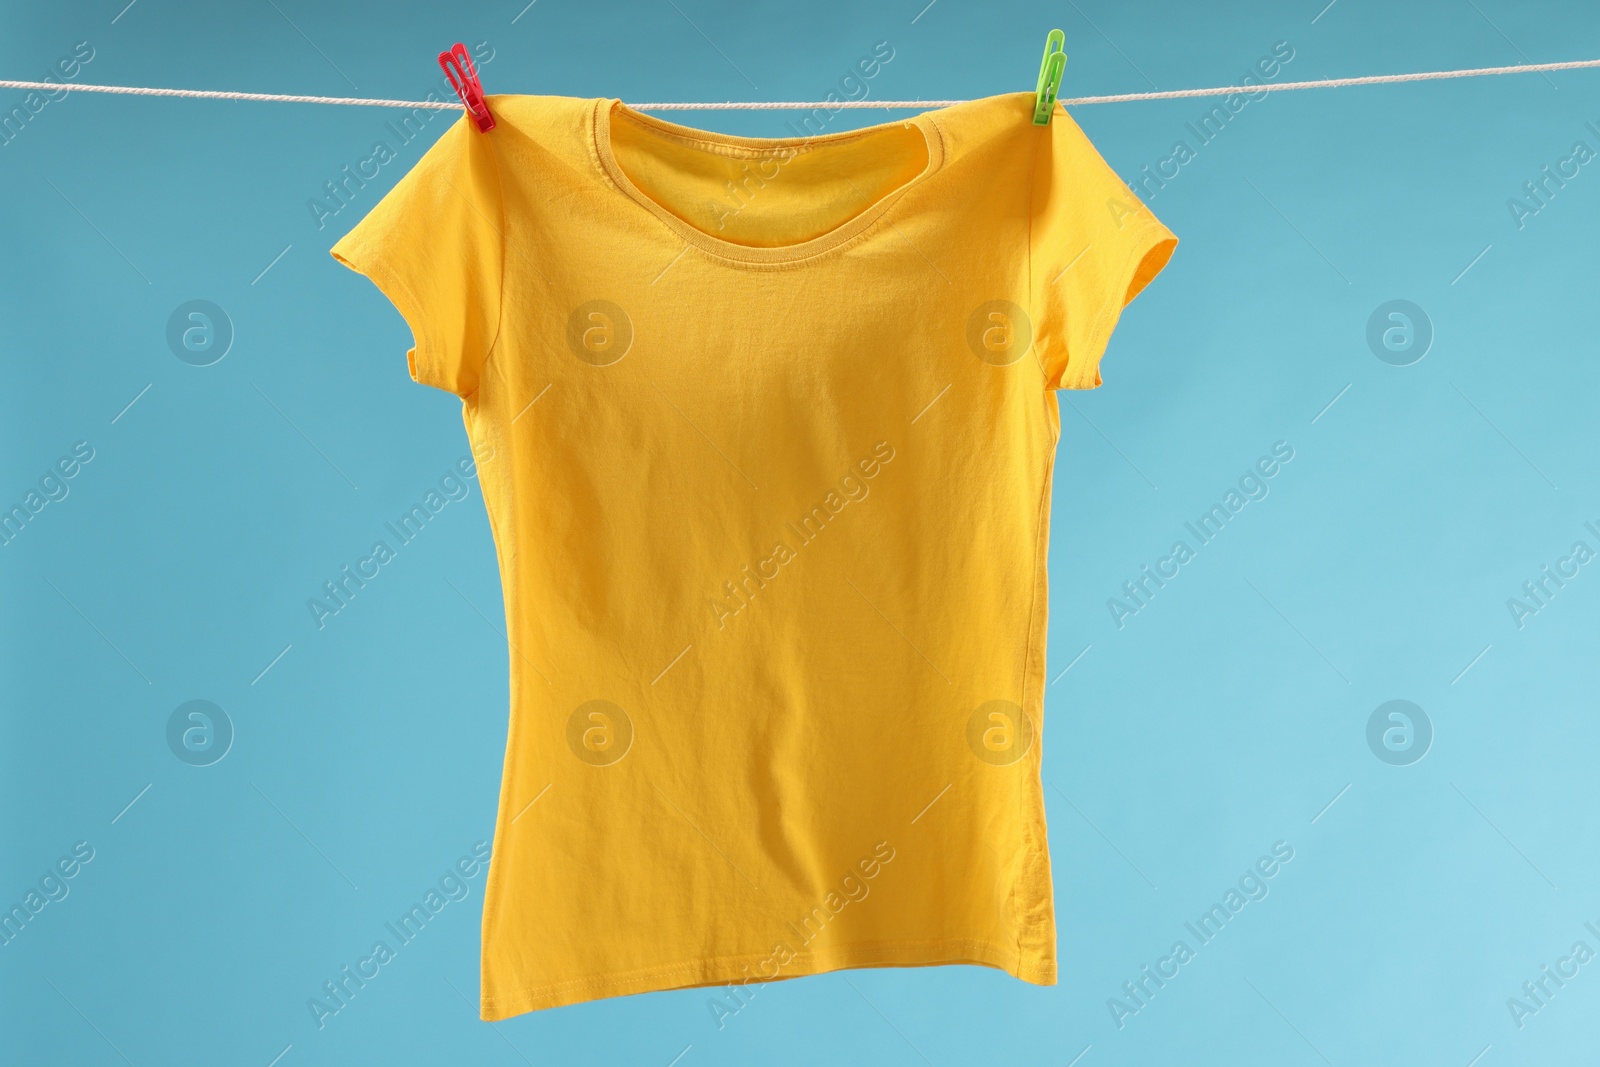 Photo of One yellow t-shirt drying on washing line against light blue background